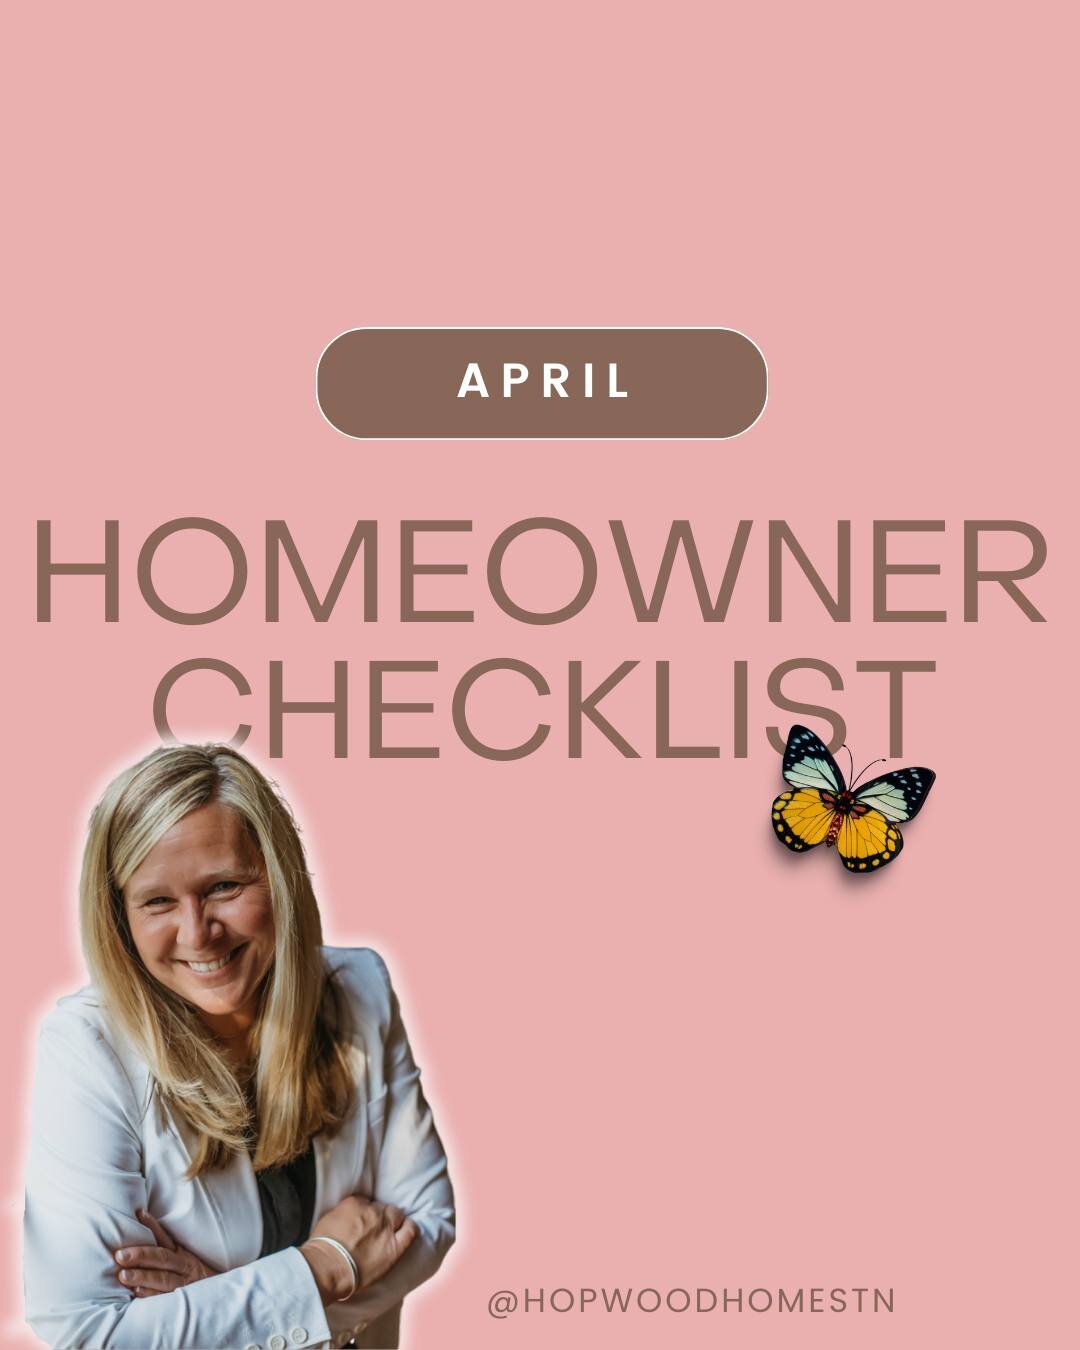 Your April Checklist has entered the chat 📲

The sun is shining (when it's not raining), the grass is turning green (when it's not covered in mud), and the warmer temps are here (except when they're not).

It's all about perspective, right?

Remembe